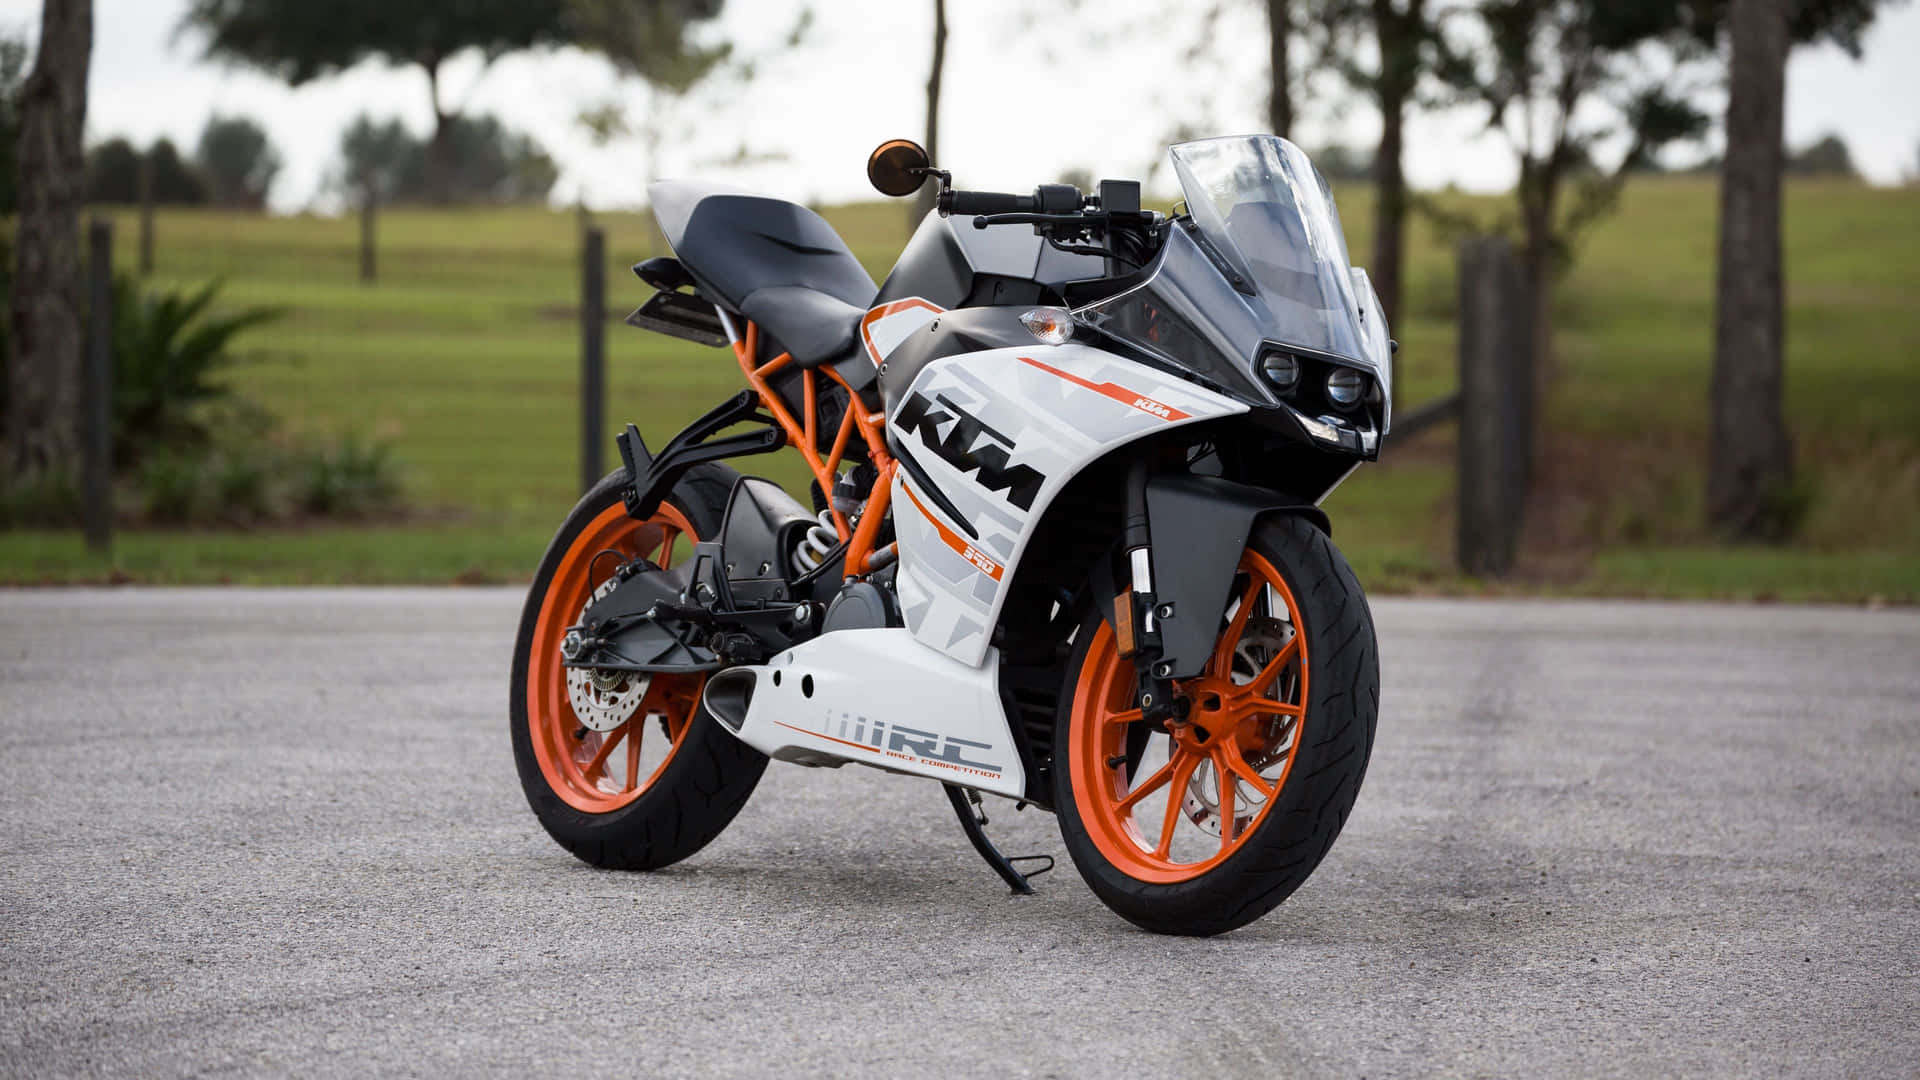 Unleash your inner champion with KTM's adventure-ready bikes!